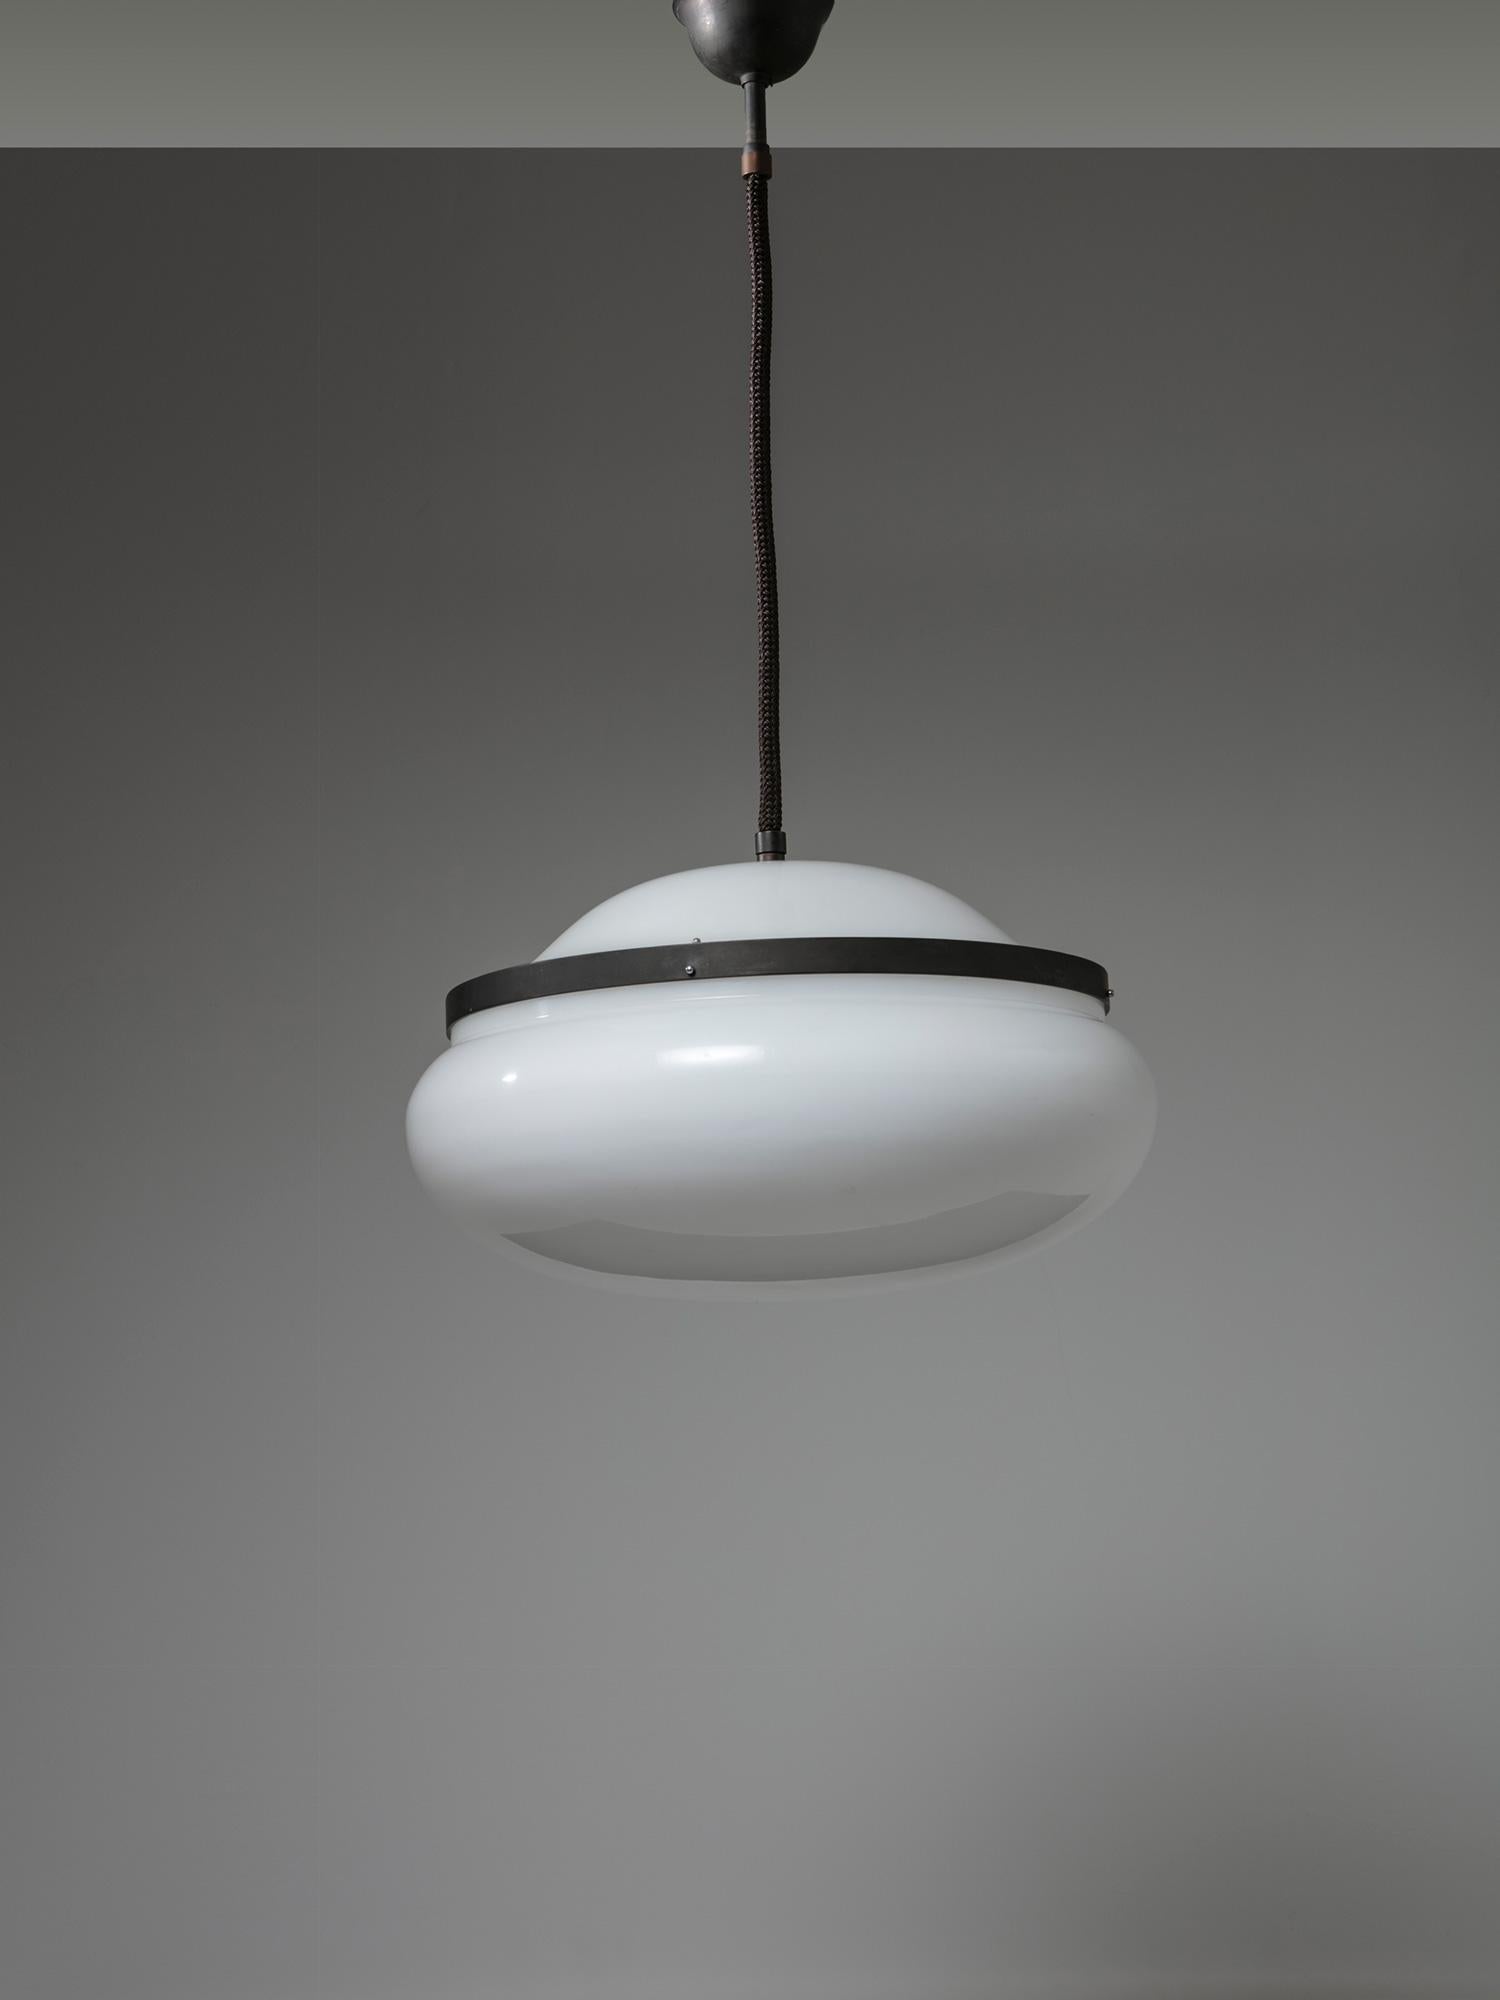 Rare pendant lamp by Gianemilio, Piero and Anna Monti for Kartell.